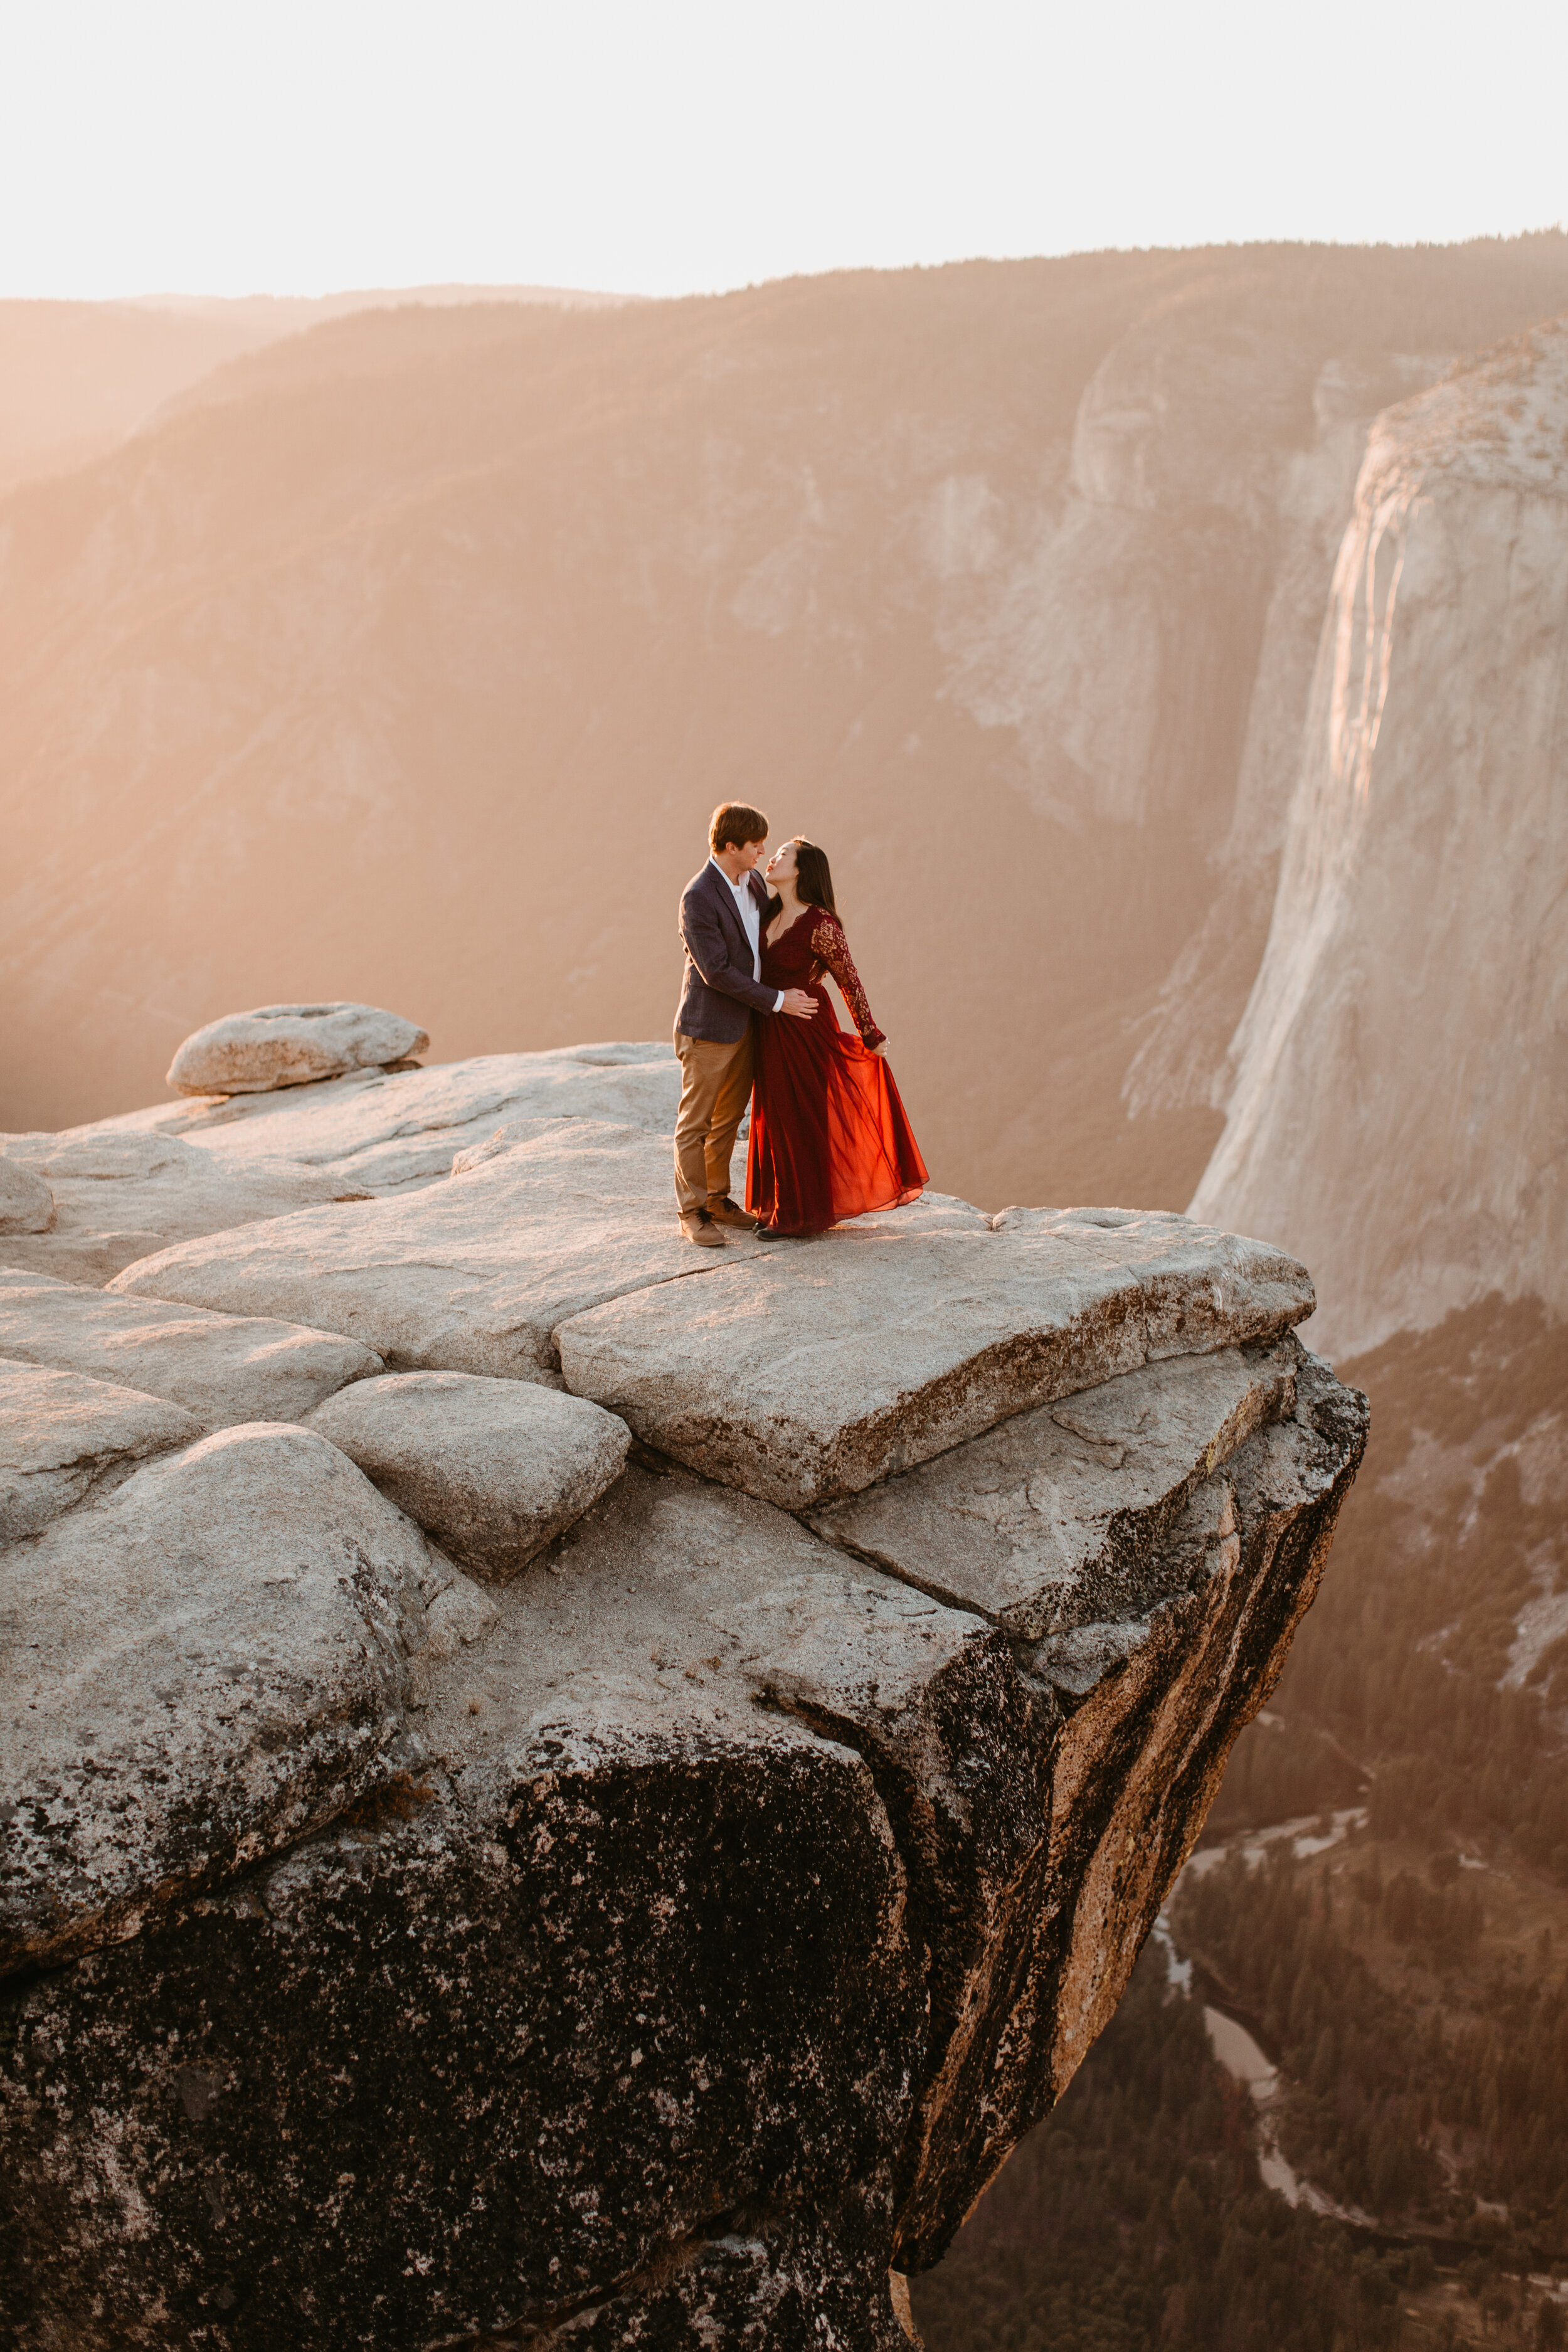 yosemite-national-park-couples-session-at-taft-point-and-yosemite-valley-yosemite-elopement-photographer-nicole-daacke-photography-152.jpg